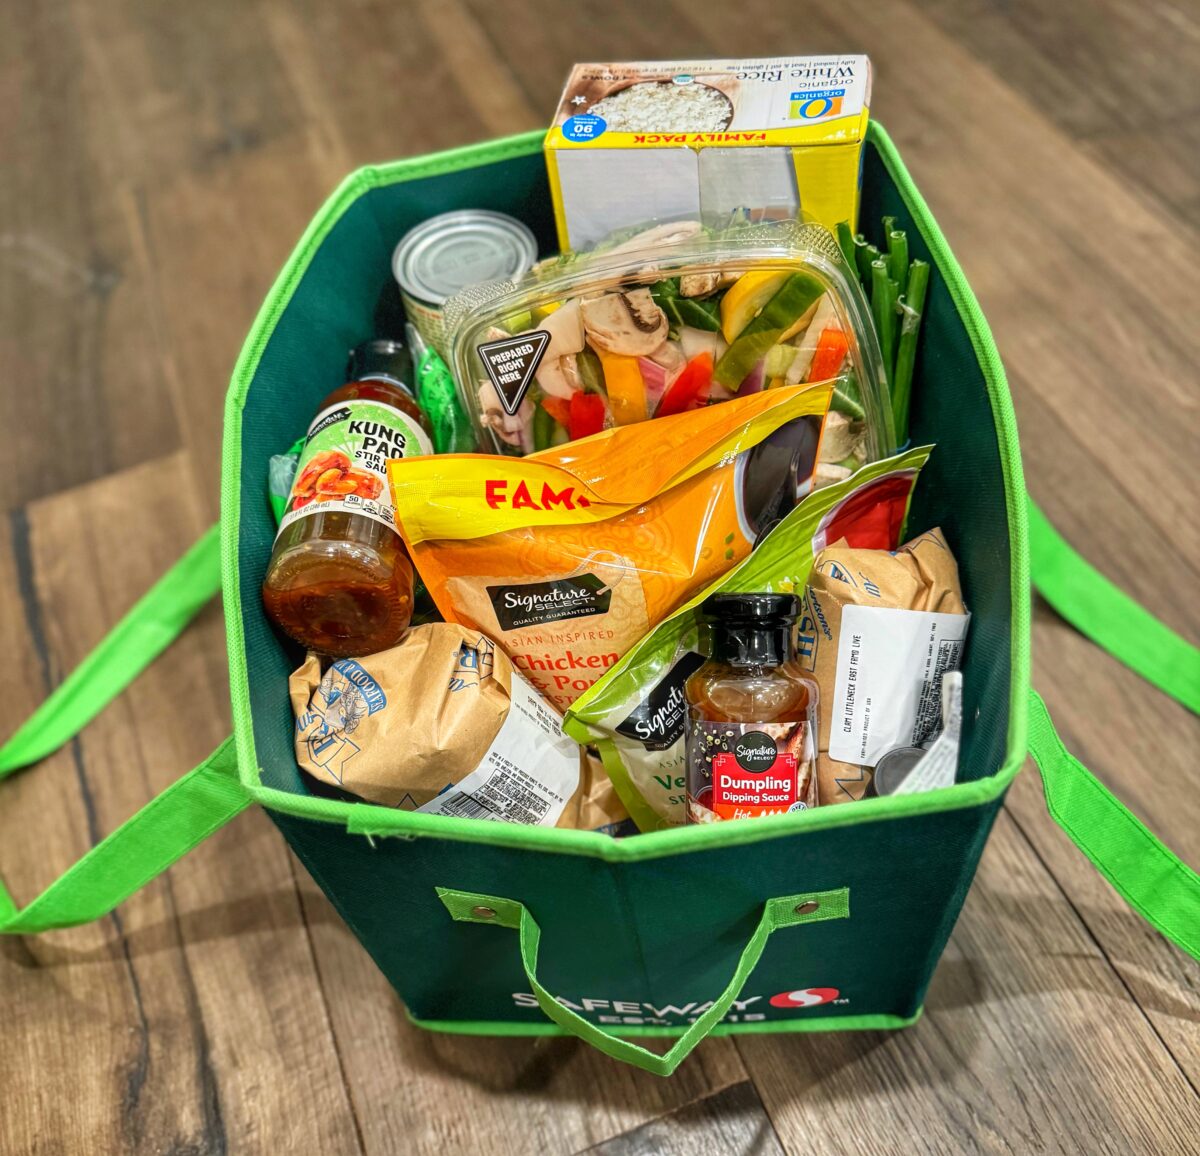 A green grocery tote full of groceries from Safeway.